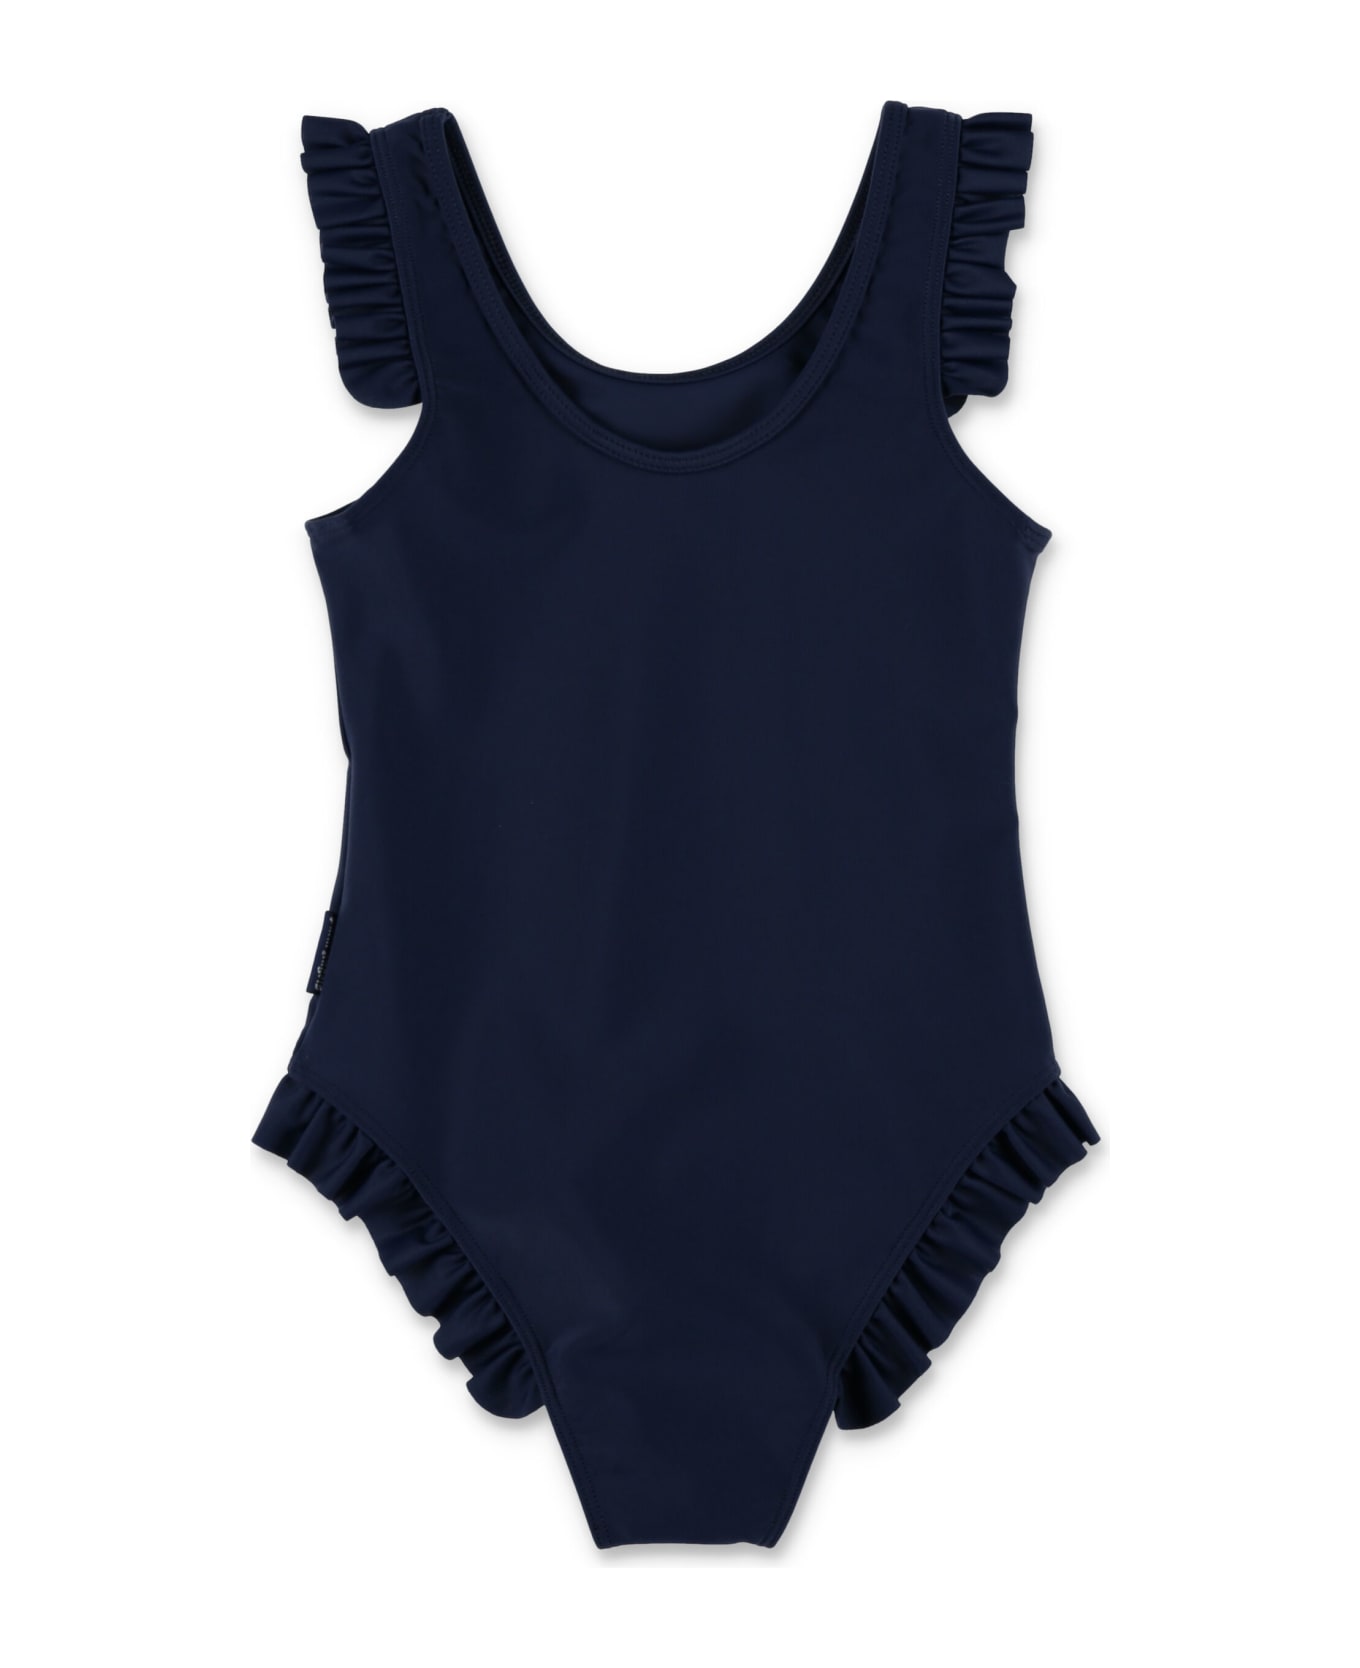 Palm Angels Logo One-piece Swimsuit - NAVY